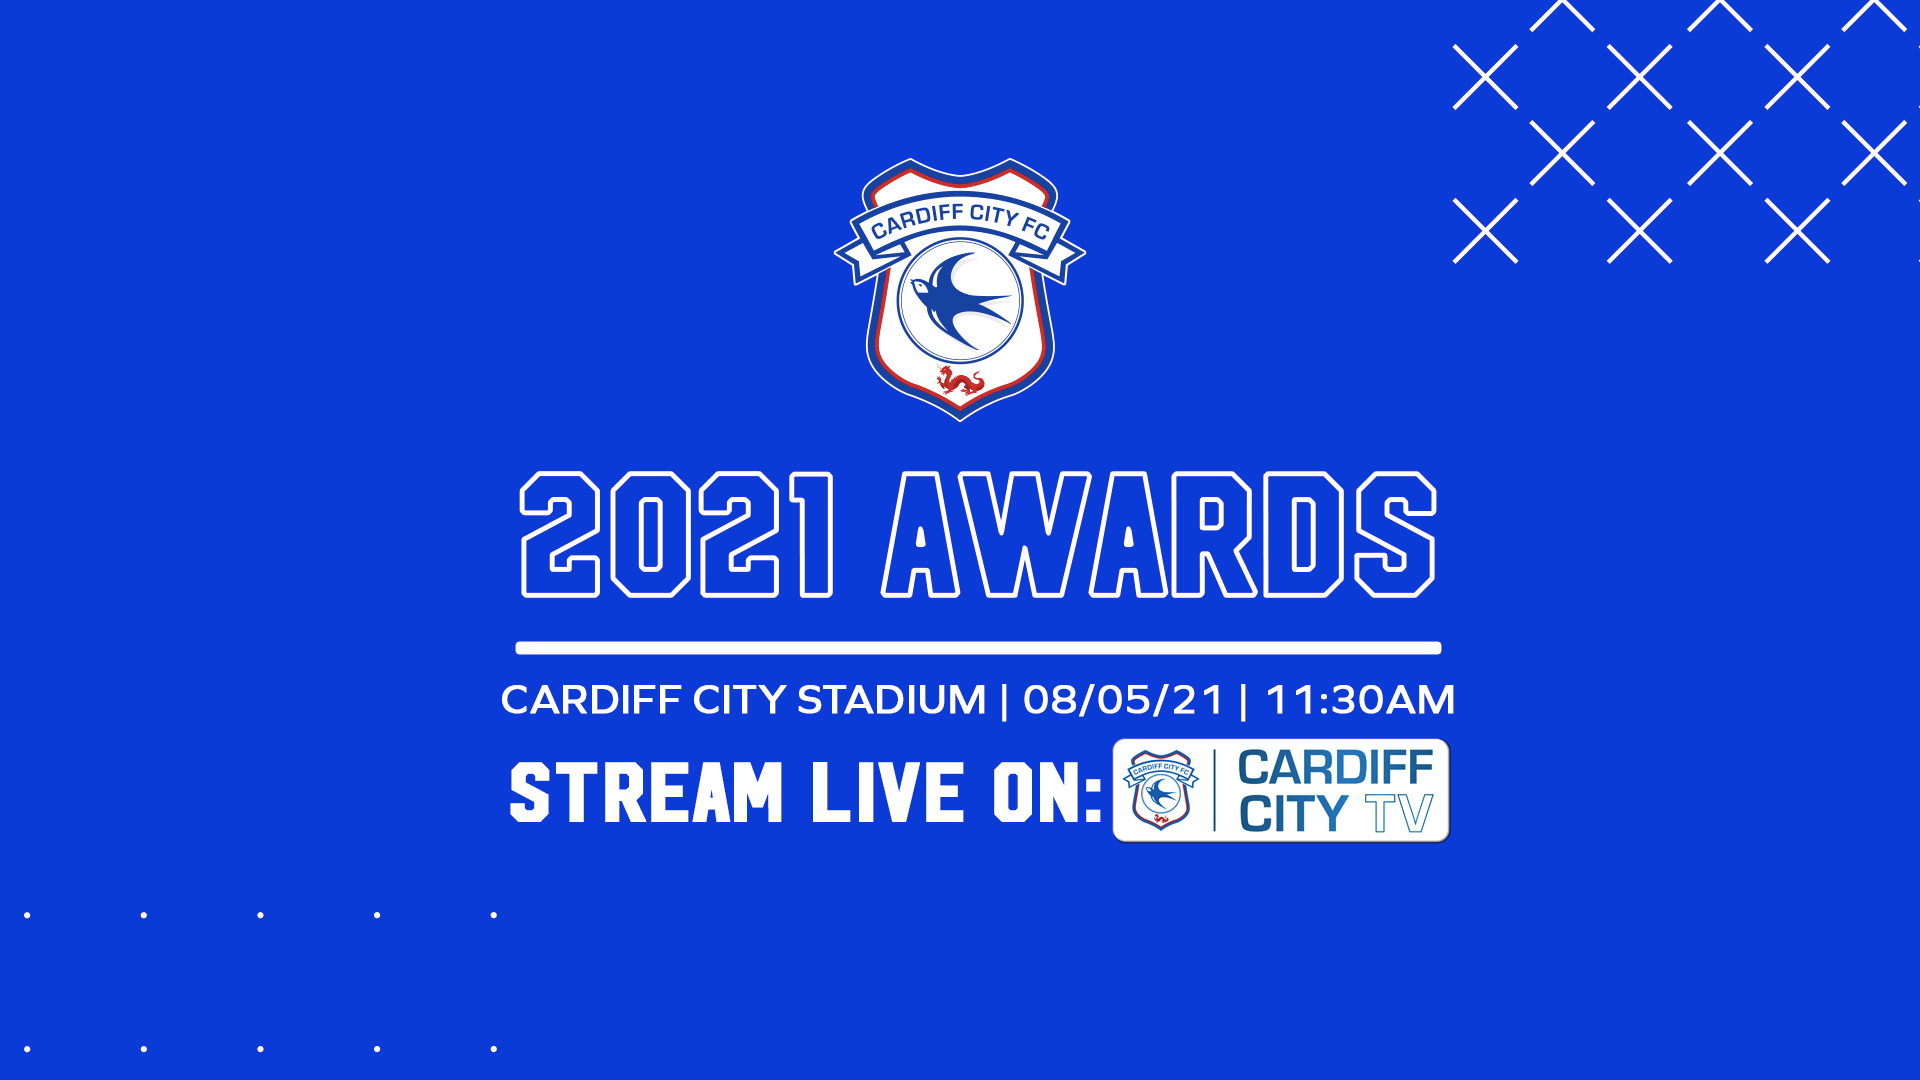 2021 Awards will take place at CCS...